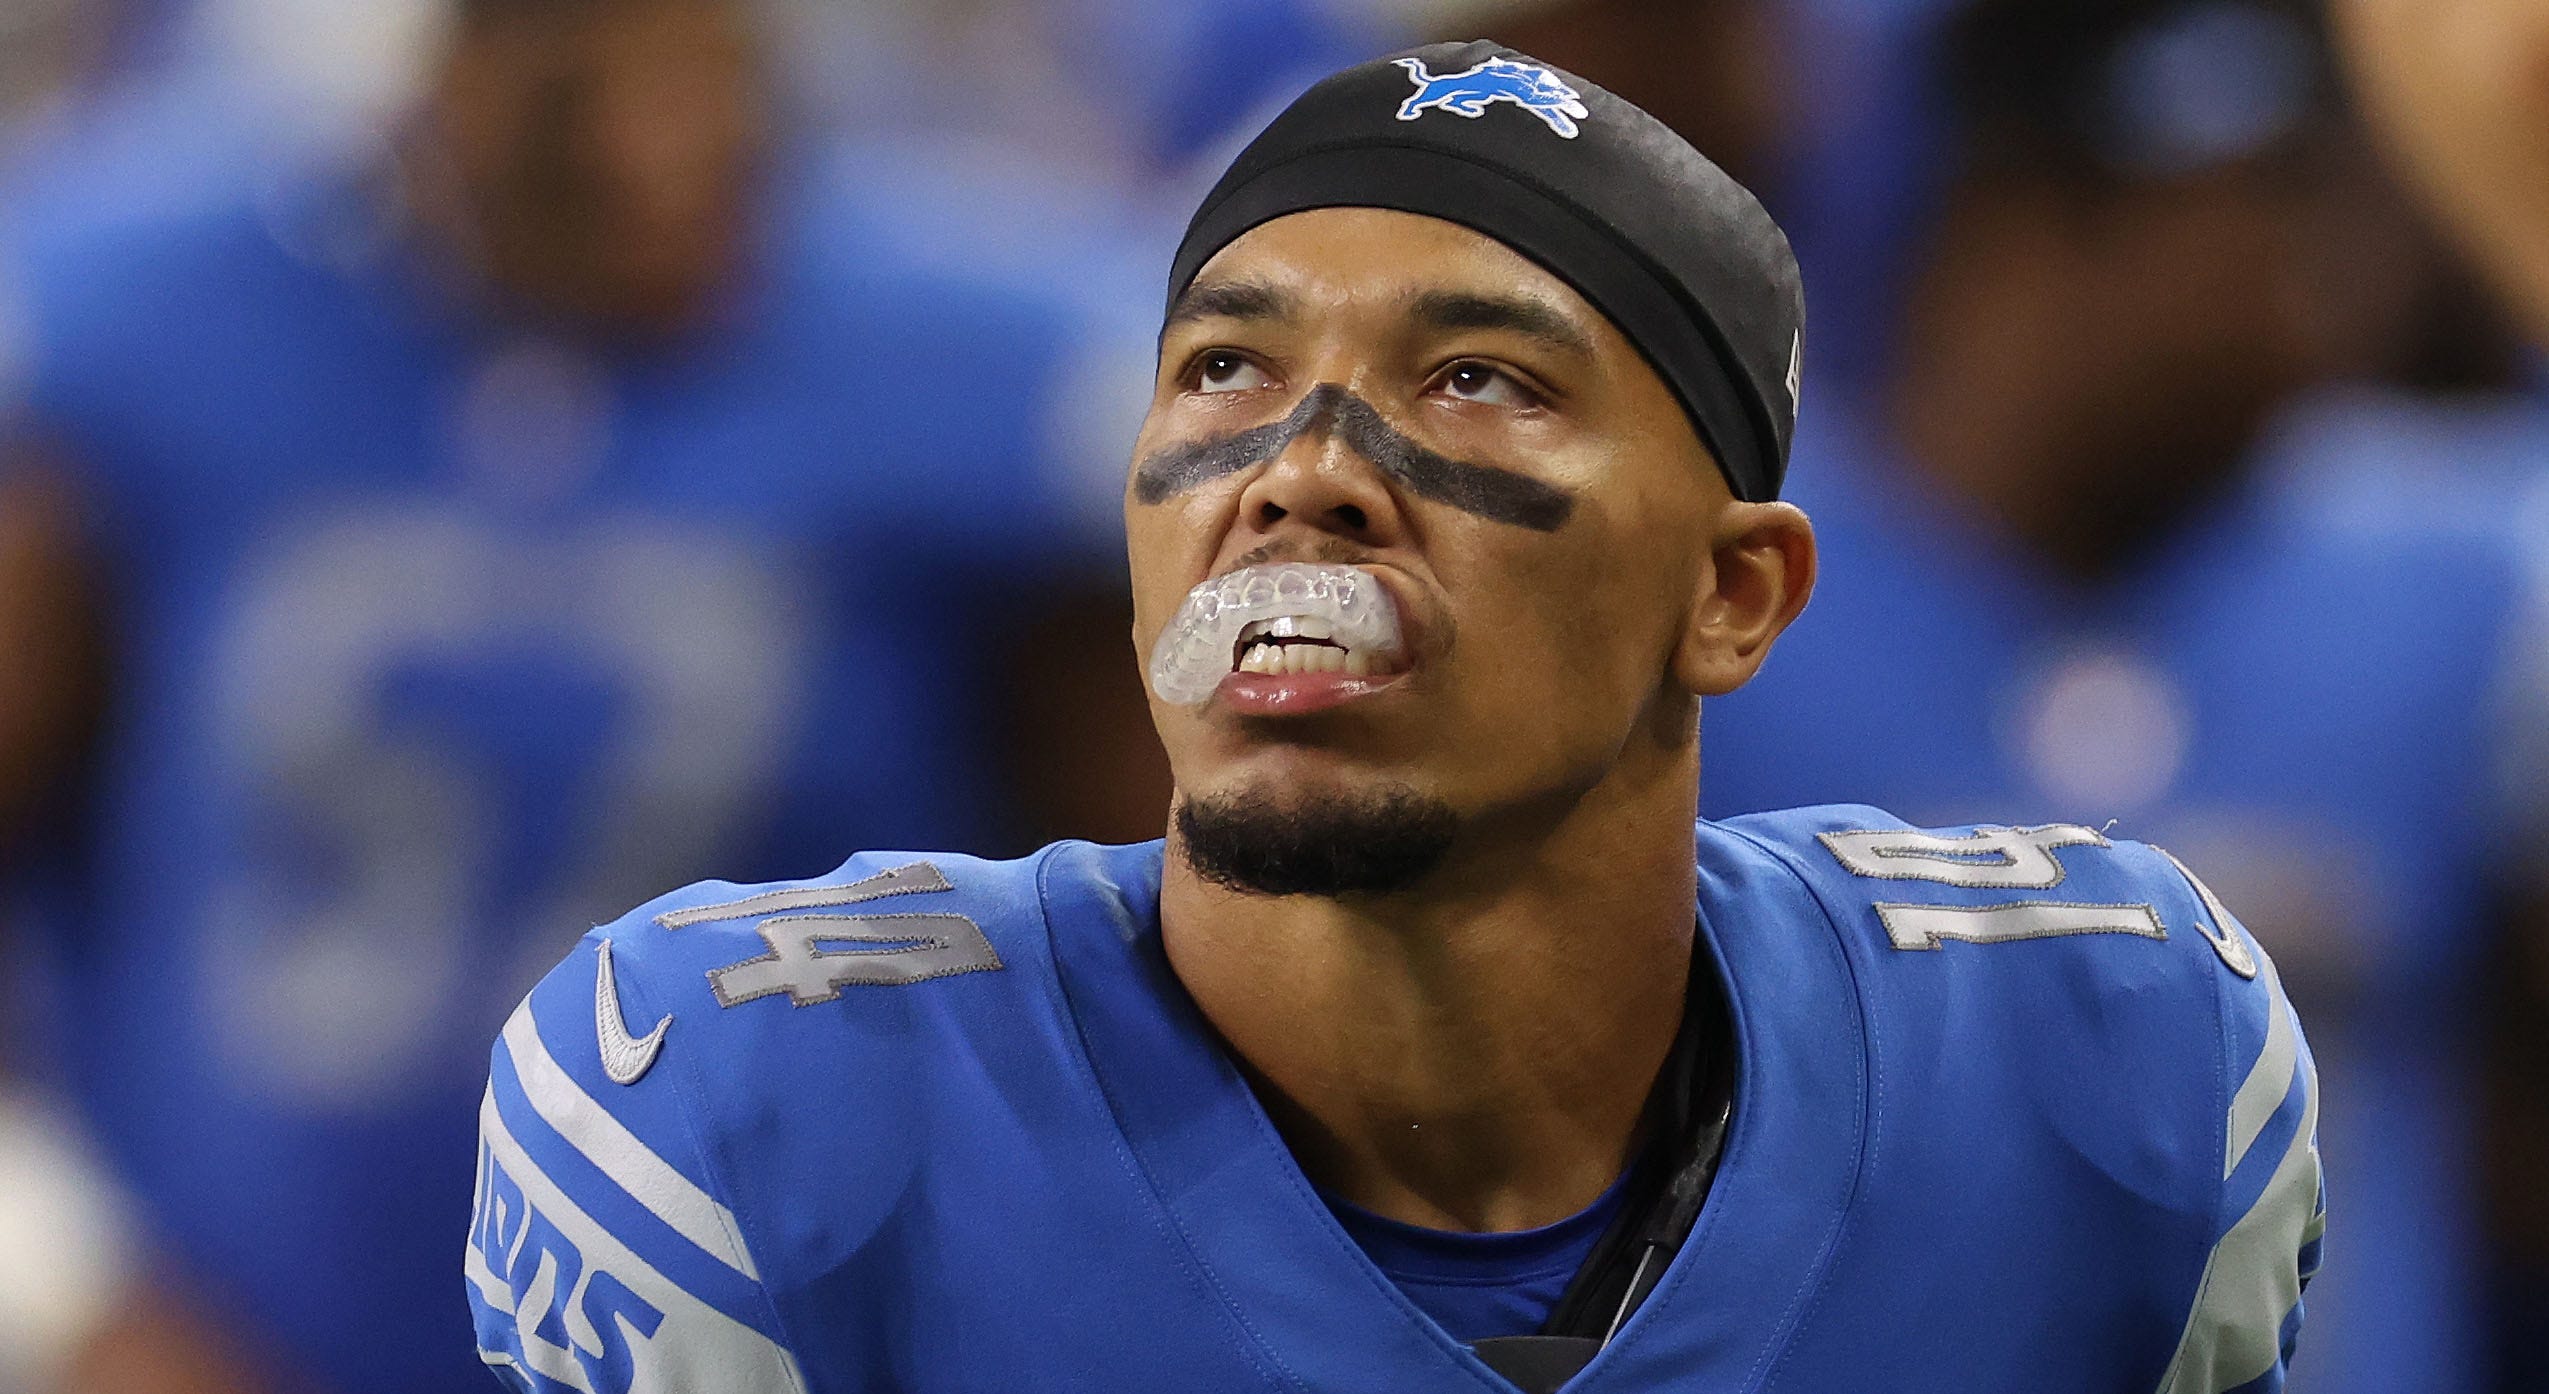 Lions' Amon-Ra St. Brown ruled out with concussion after taking